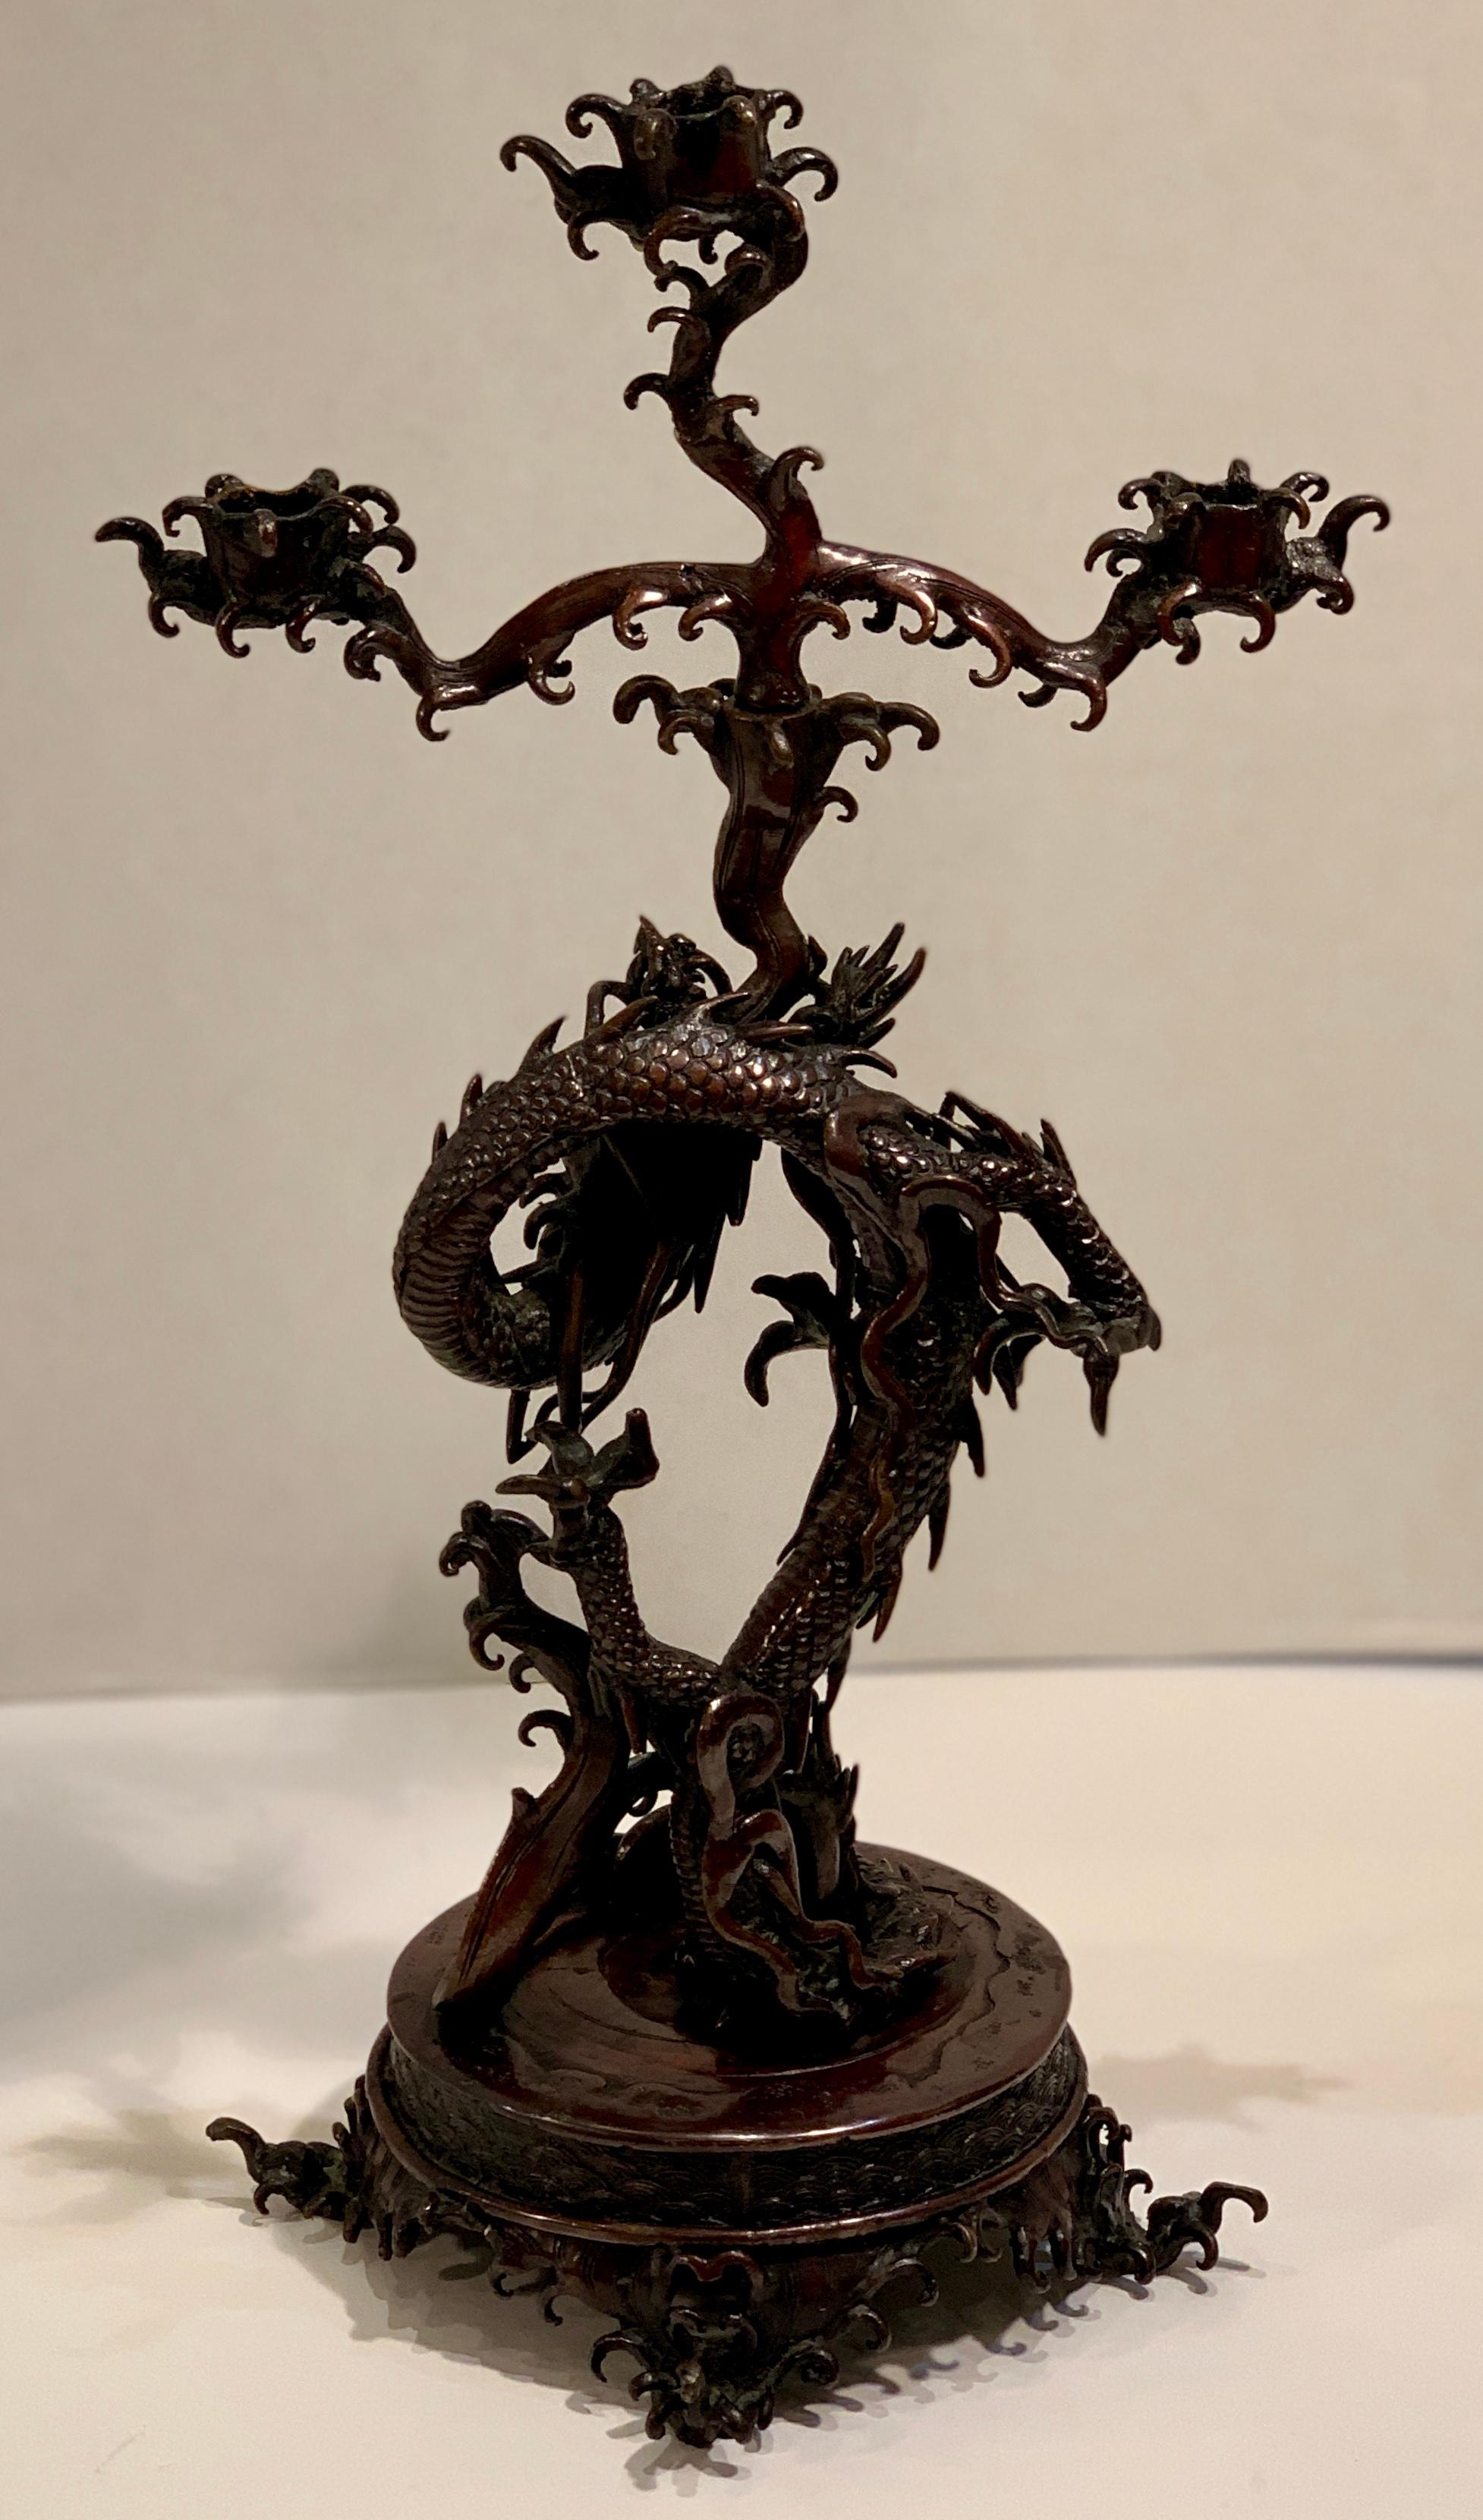 Magnificent and powerful, fantastically sculptural, ferocious bronze Japanese writhing sea dragon candleholder is coiled around itself, with an uplifted head and a stylized plume of water spouting from the dragon’s mouth, which forms the base for